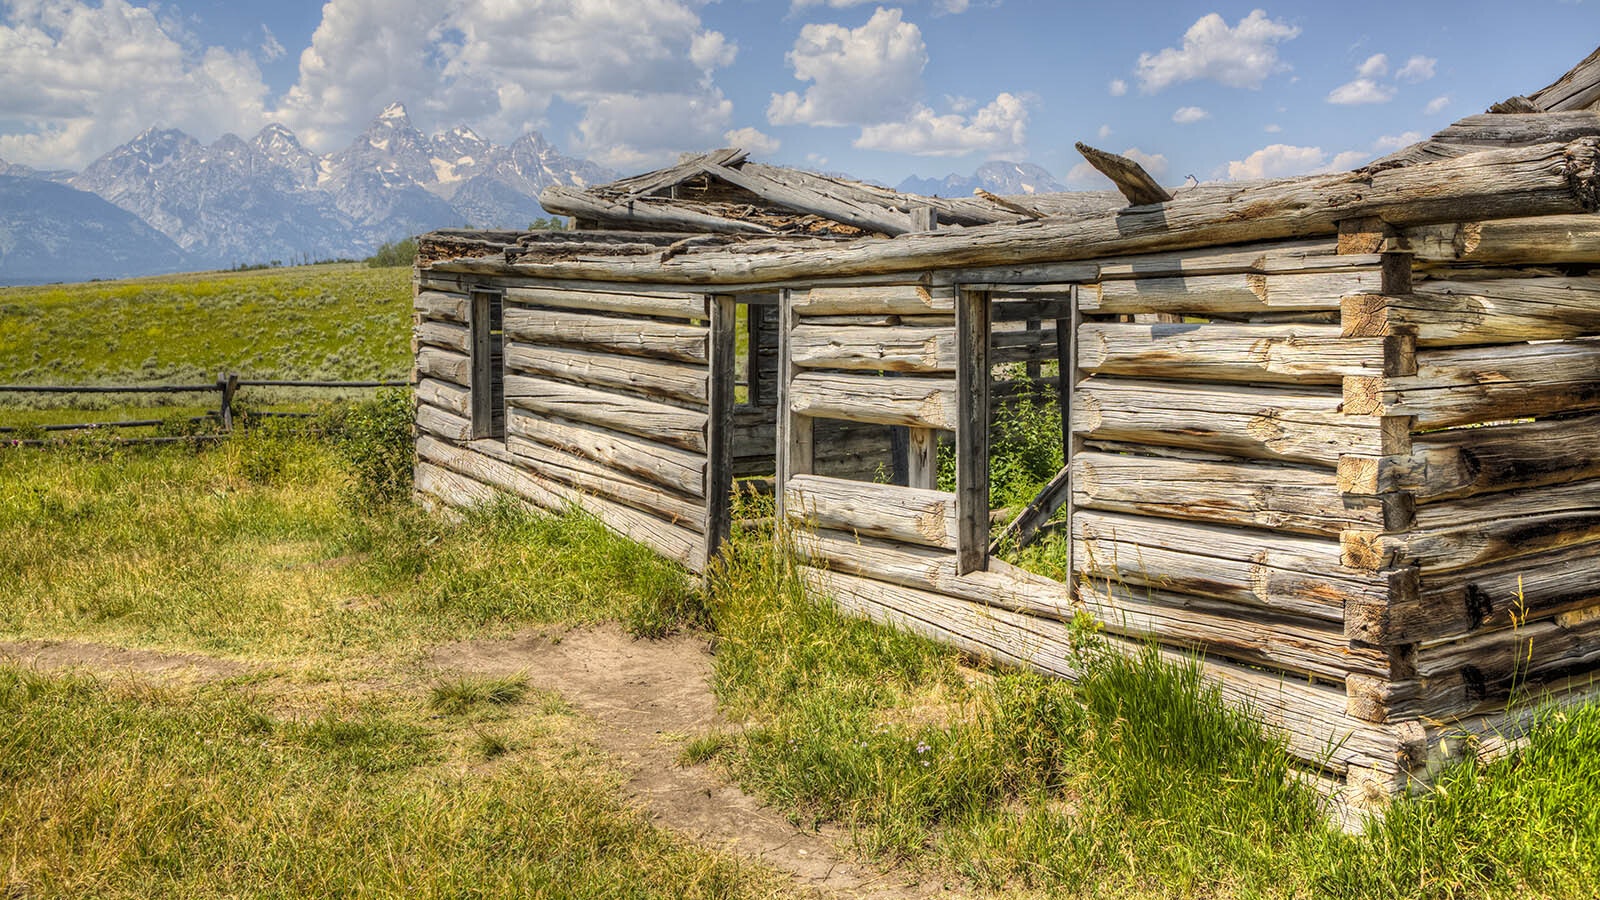 The "Shane" cabin featured in the classic Western is still in Grand Teton National Park.